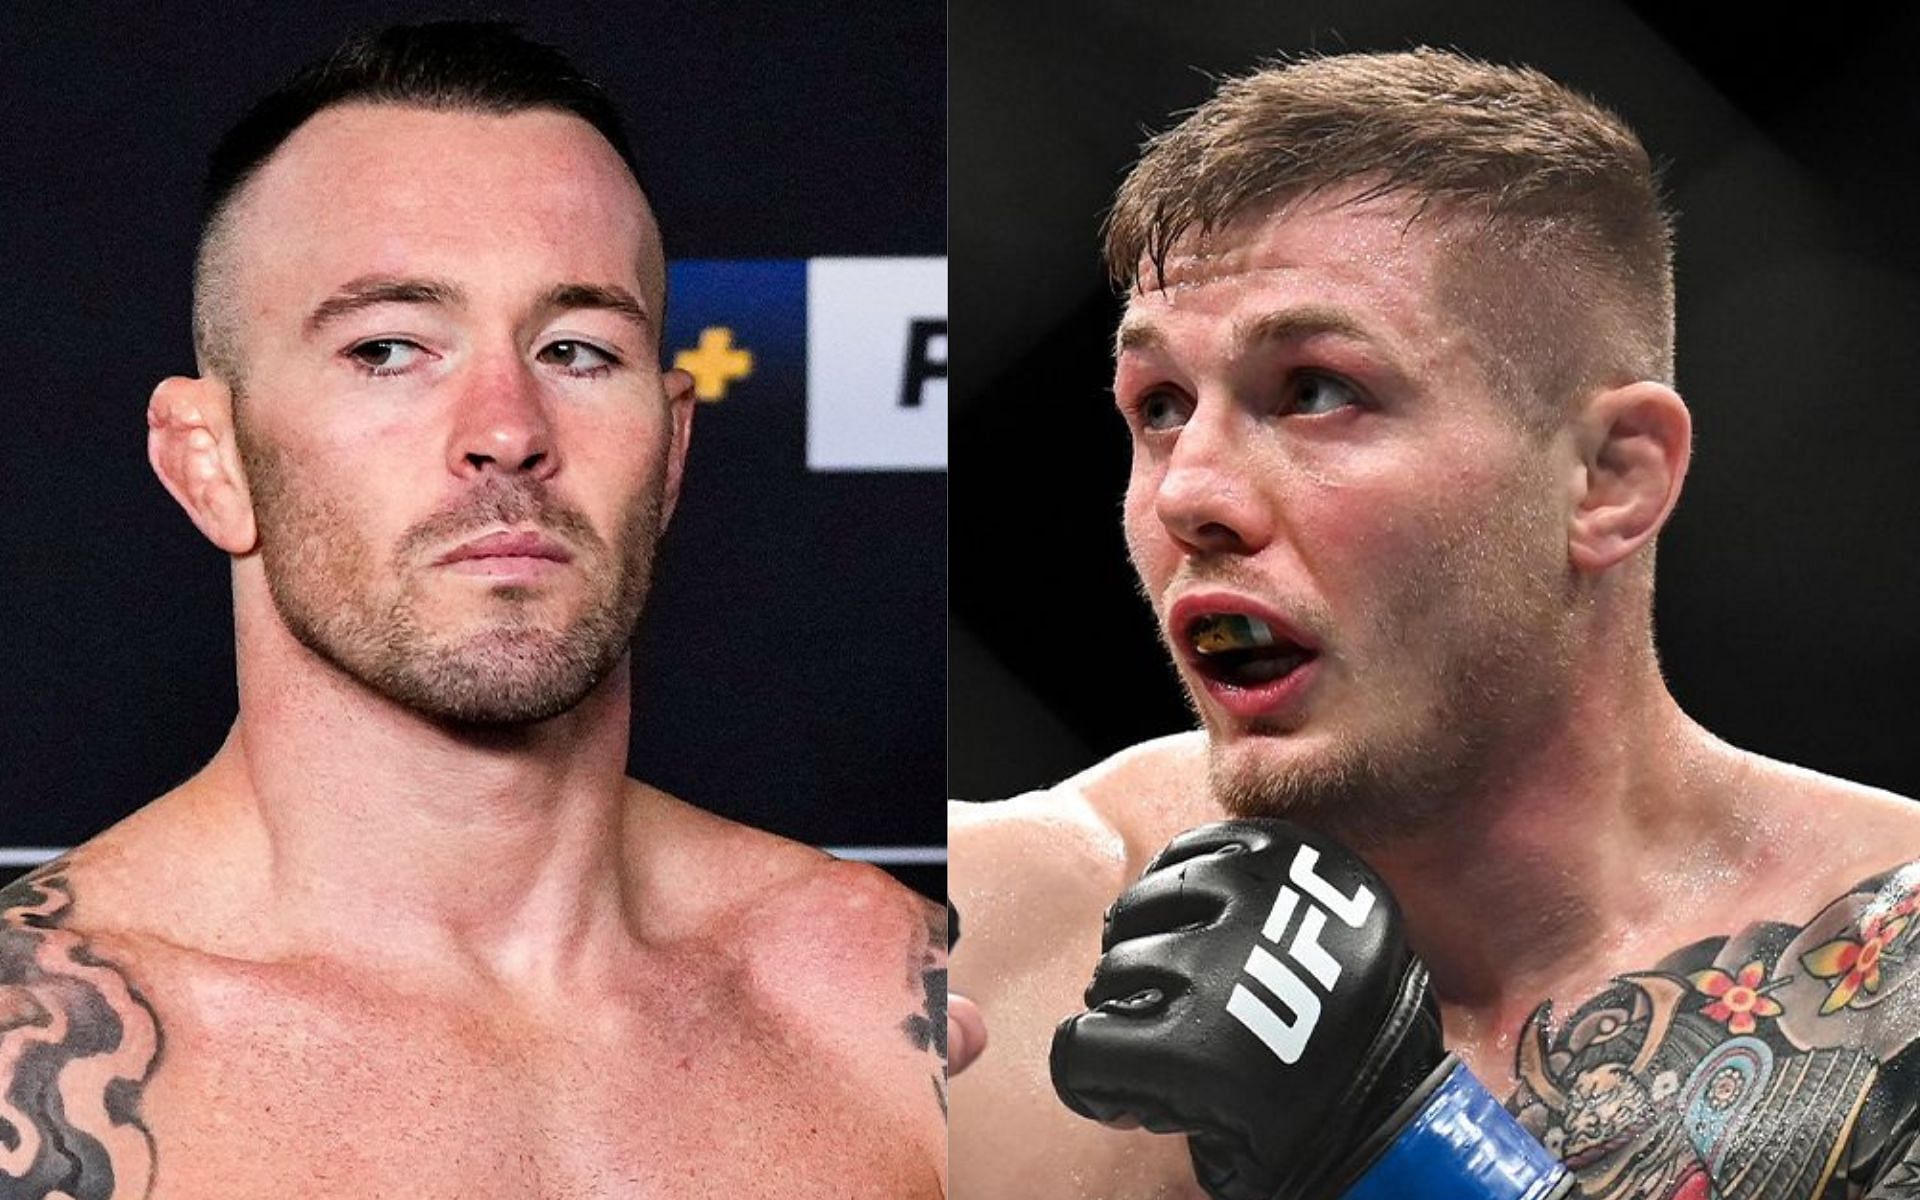 Colby Covington [left] Marvin Vettori [right] [Images courtesy: @espnmma and @MMAJunkie (Twitter)]